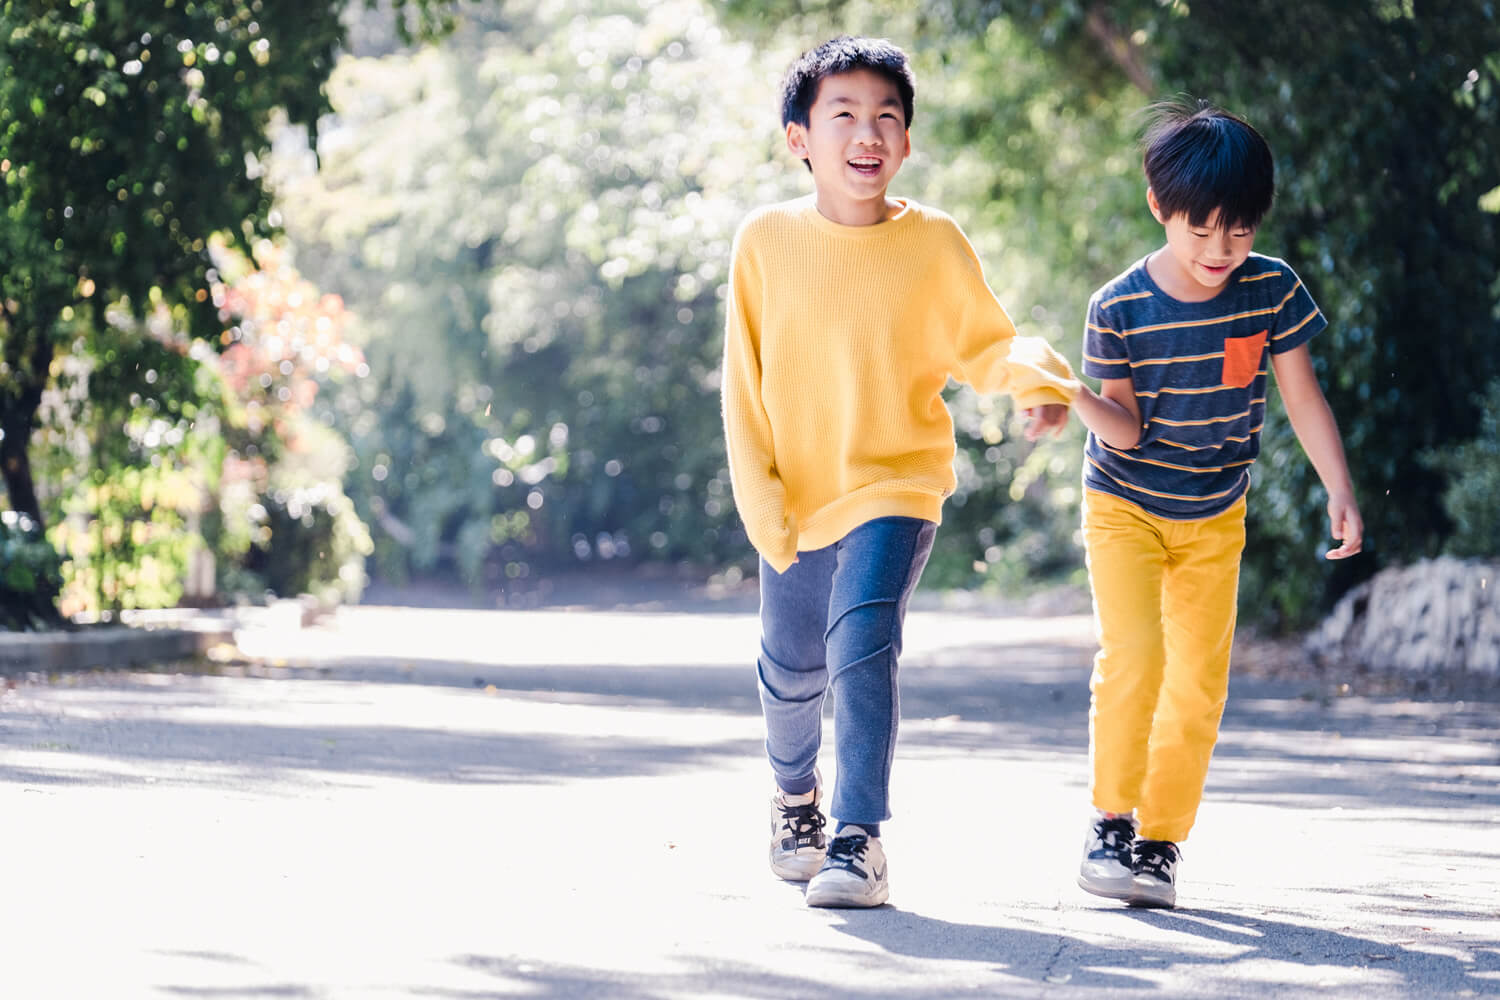 FUJIFILM Exposure Center Article - Be Versatile With Your Vision Using Zoom Lenses. Photograph shows a long shot of two boys walking towards the camera along a tree-lined driveway, holding hands and laughing.